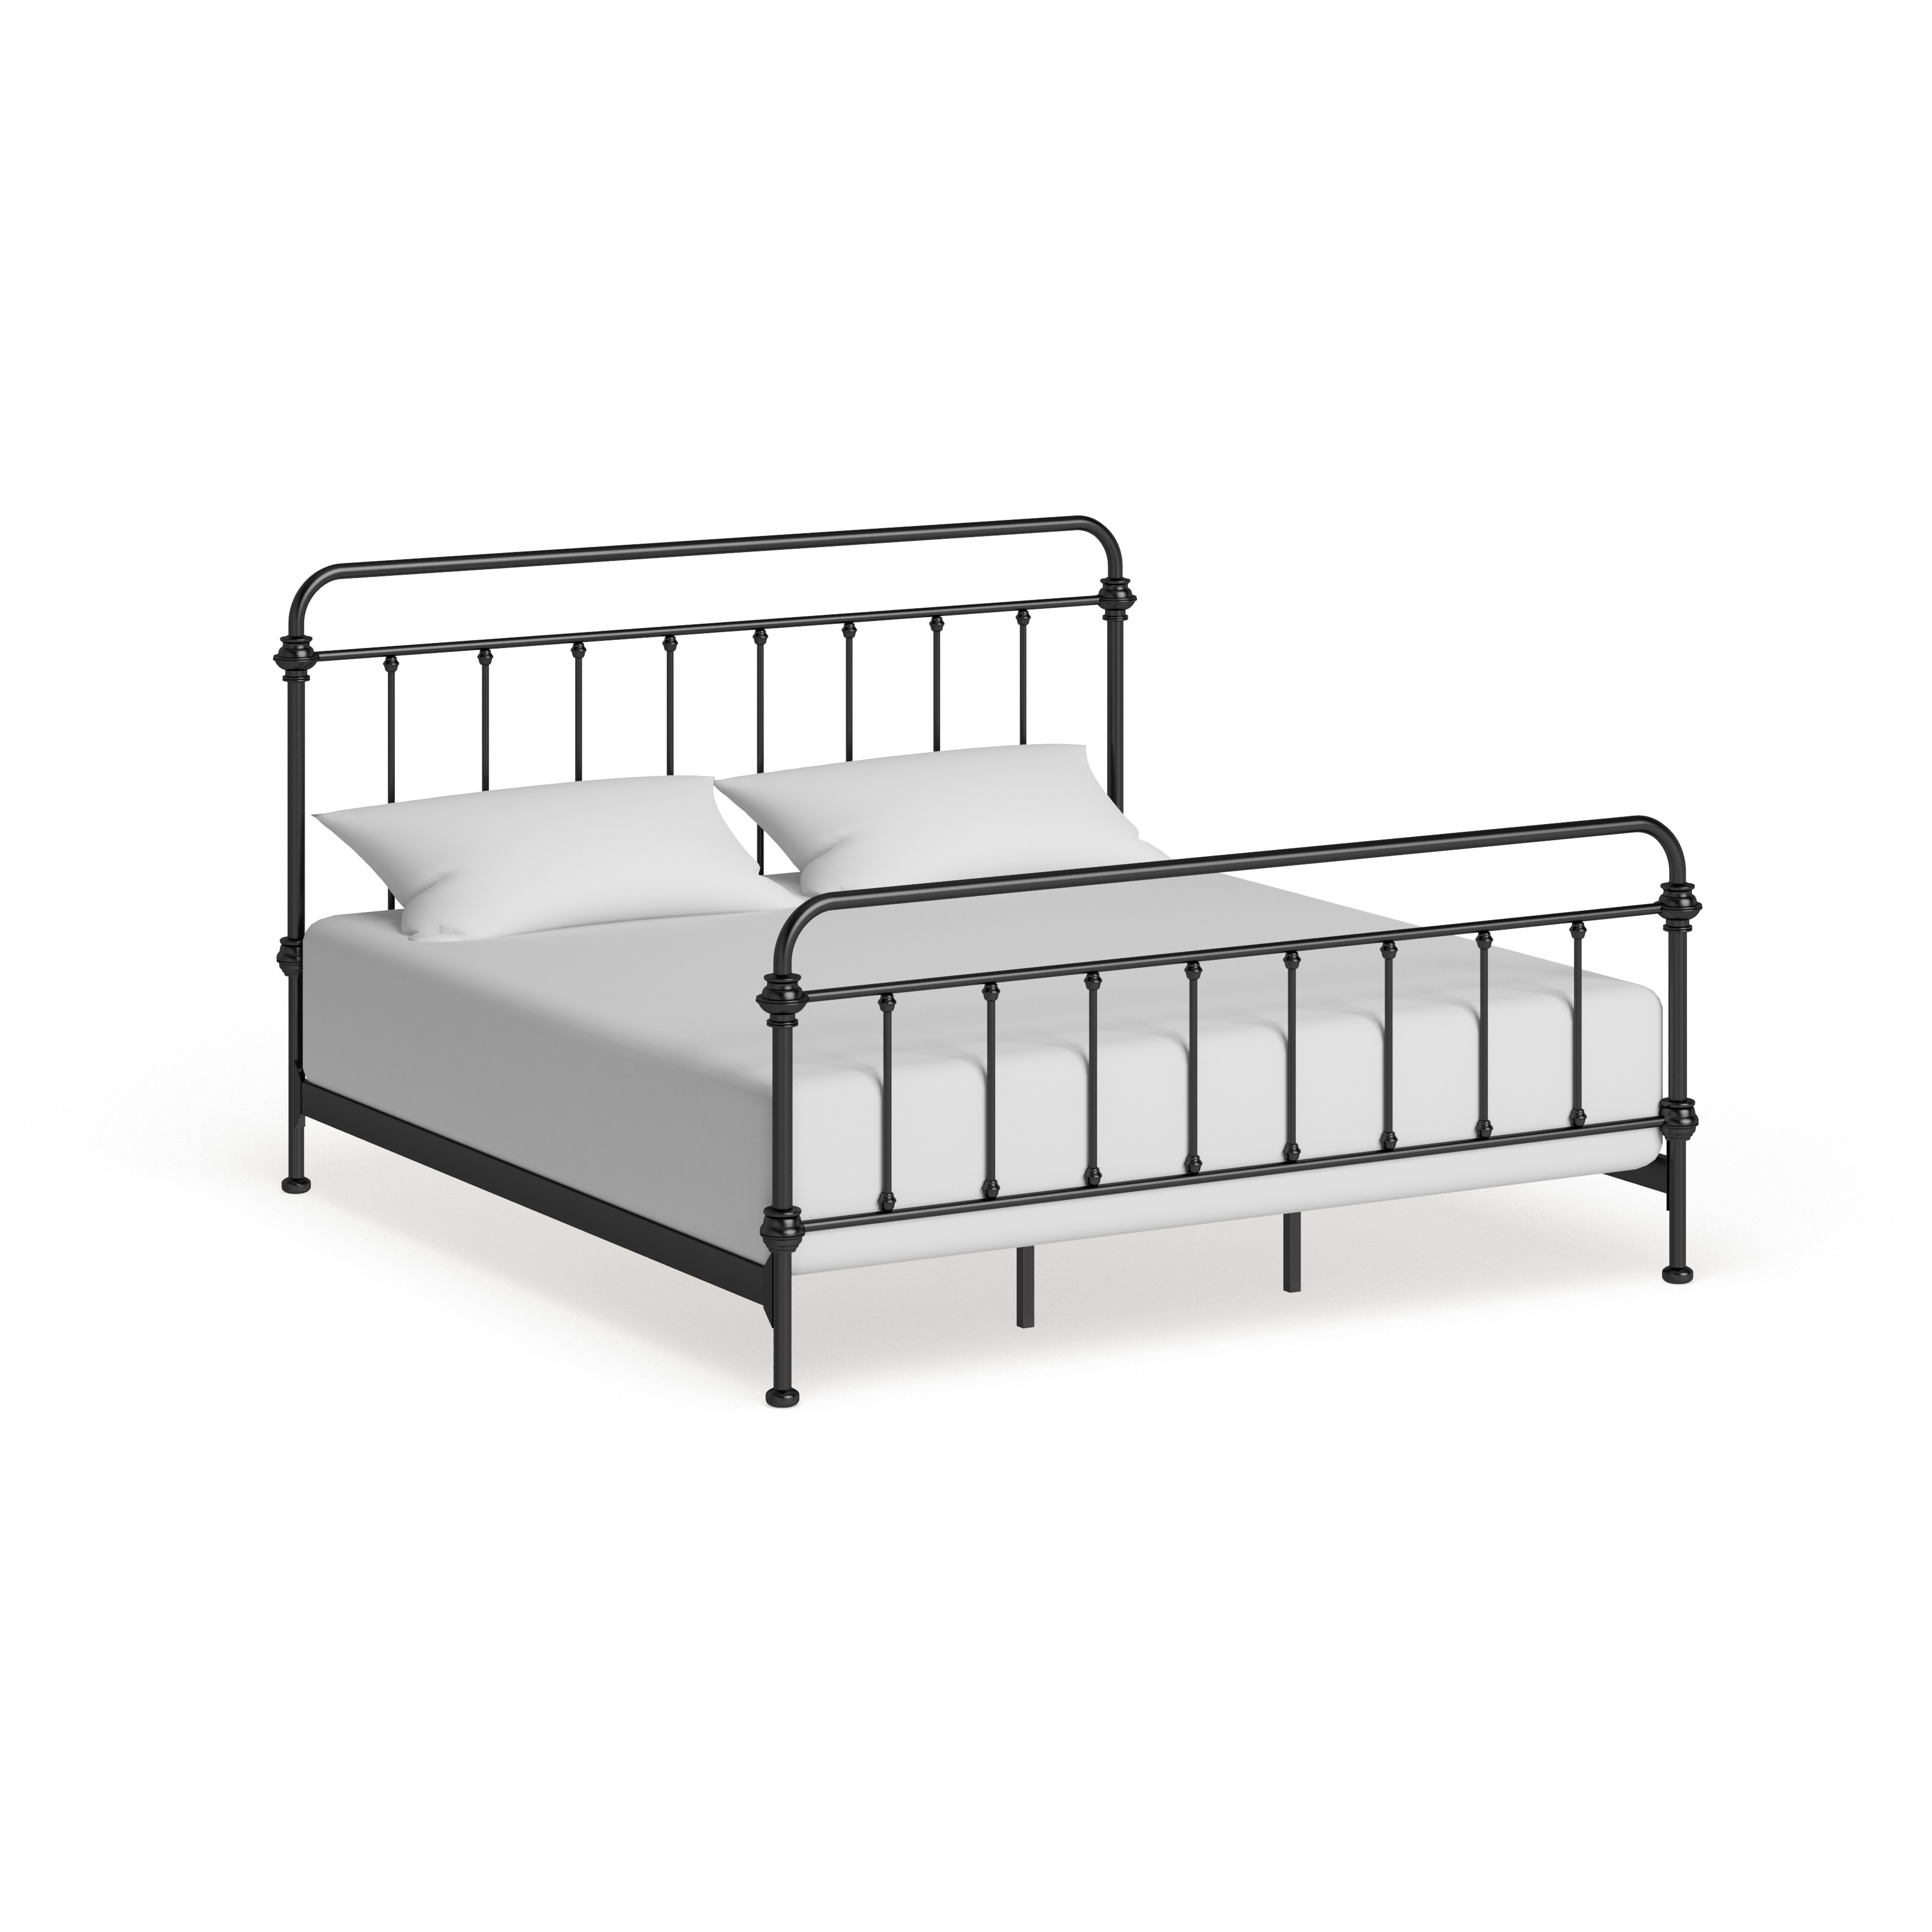 Giselle Antique Dark Bronze Iron Metal Bed by iNSPIRE Q Classic - Bed ...